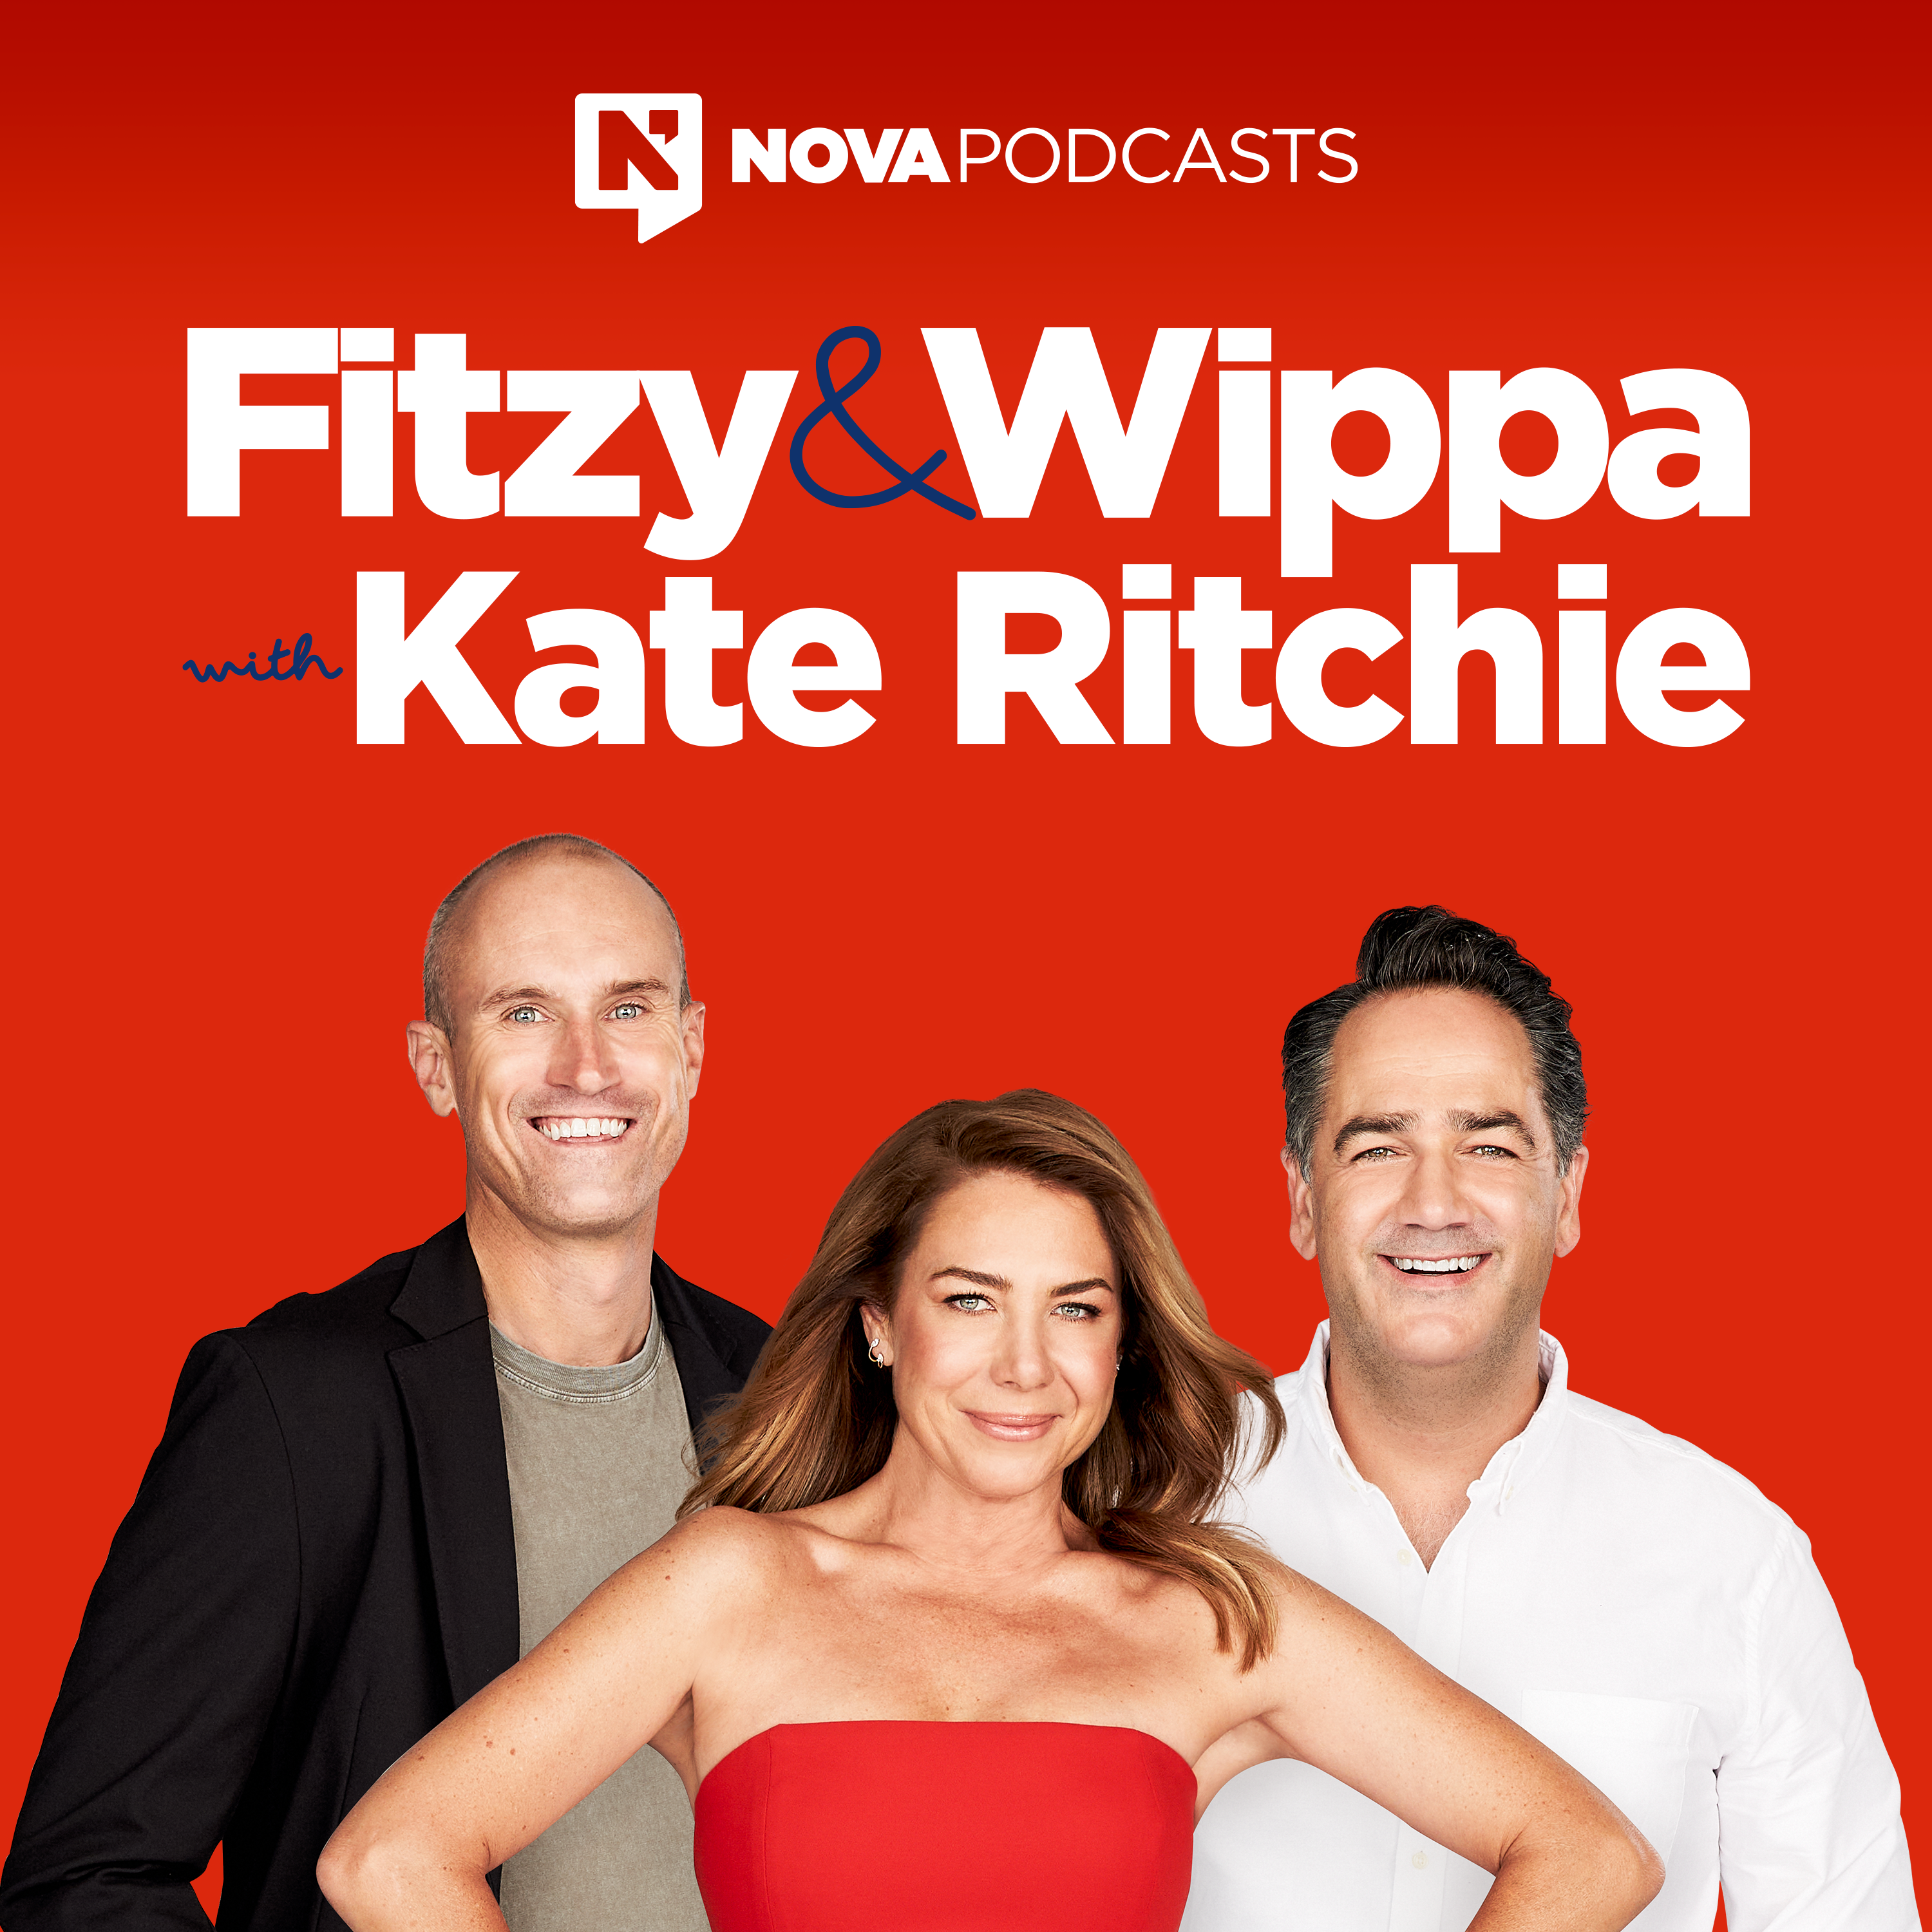 CATCH UP - Fitzy's 'shart' task for our Audio Producer will leave you in stitches